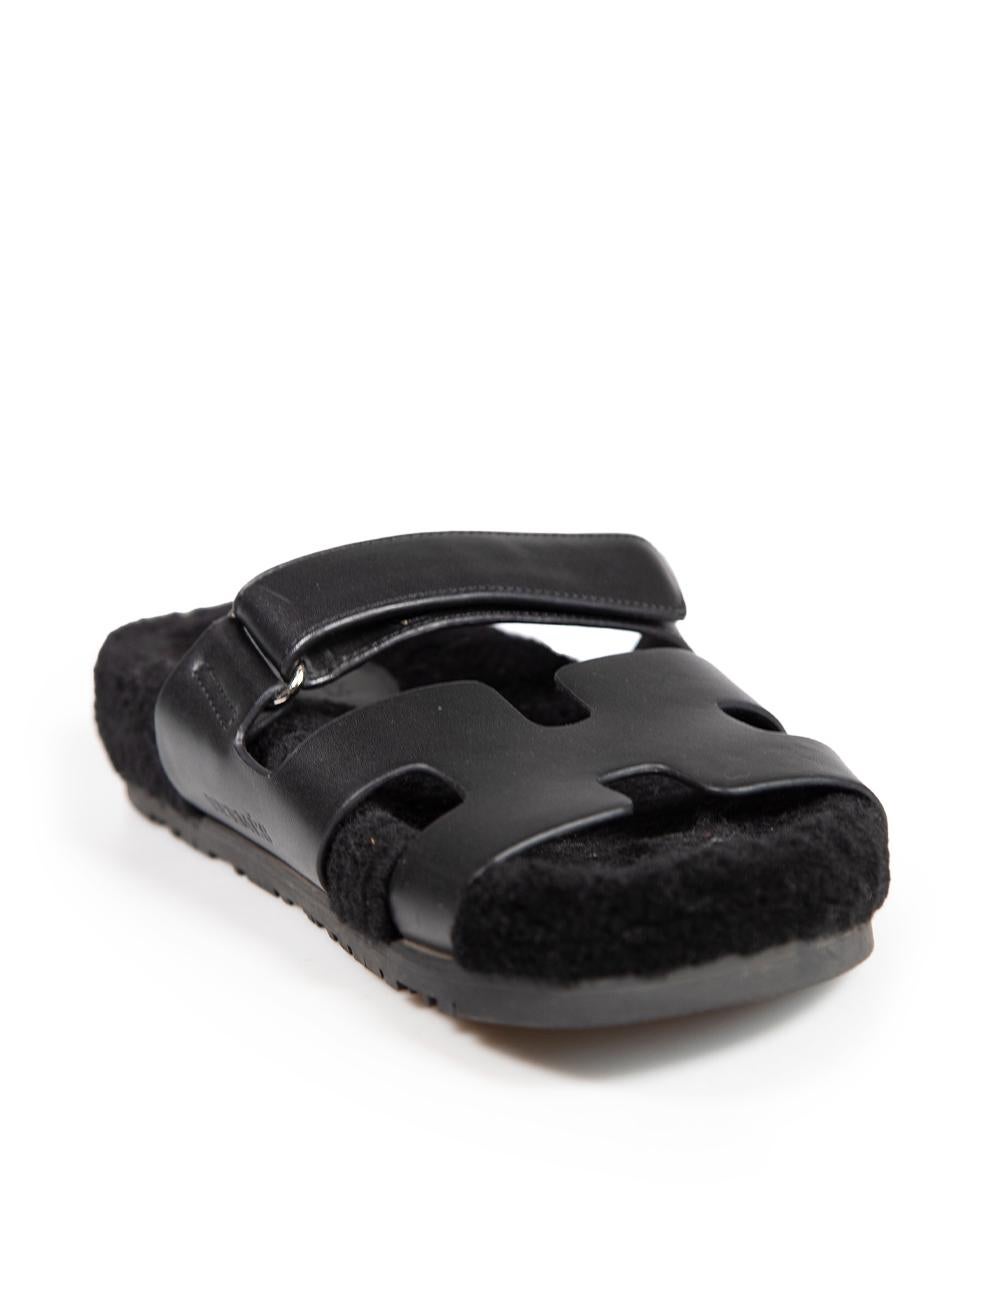 CONDITION is Very good. Minimal wear to sandals is evident. Minimal wear to the insoles is seen with the toe imprints and some abrasions on the straps on this used Hermès designer resale item.
 
 
 
 Details
 
 
 Model: Chypre
 
 Black
 
 Leather
 
